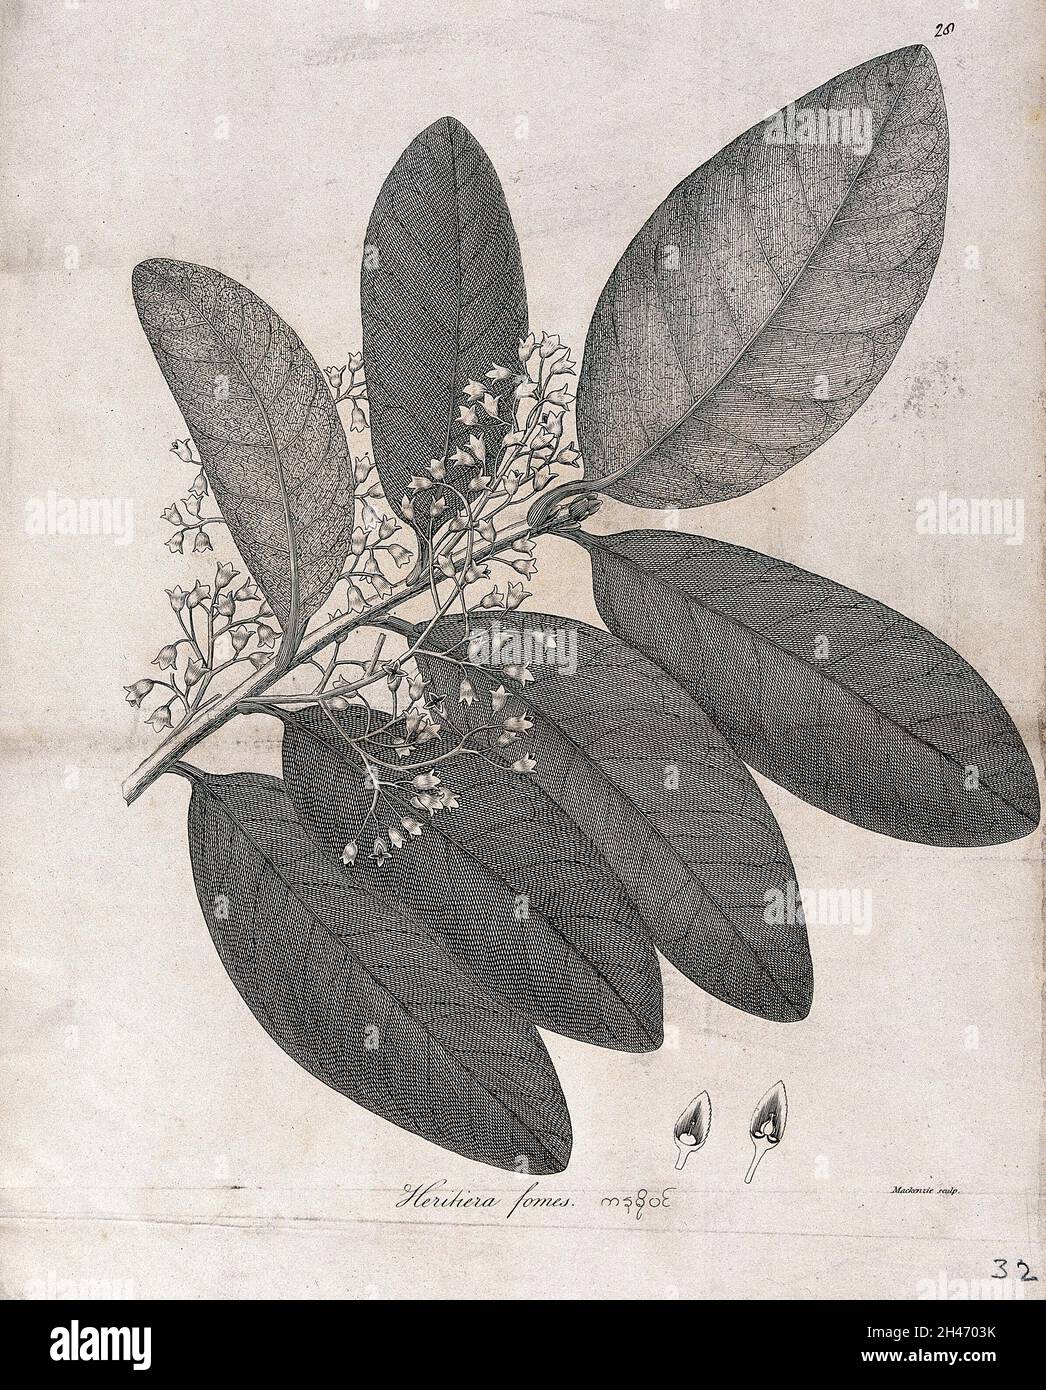 Heritiera fomes: flowering stem with floral segments. Line engraving by Mackenzie, c.1795. Stock Photo